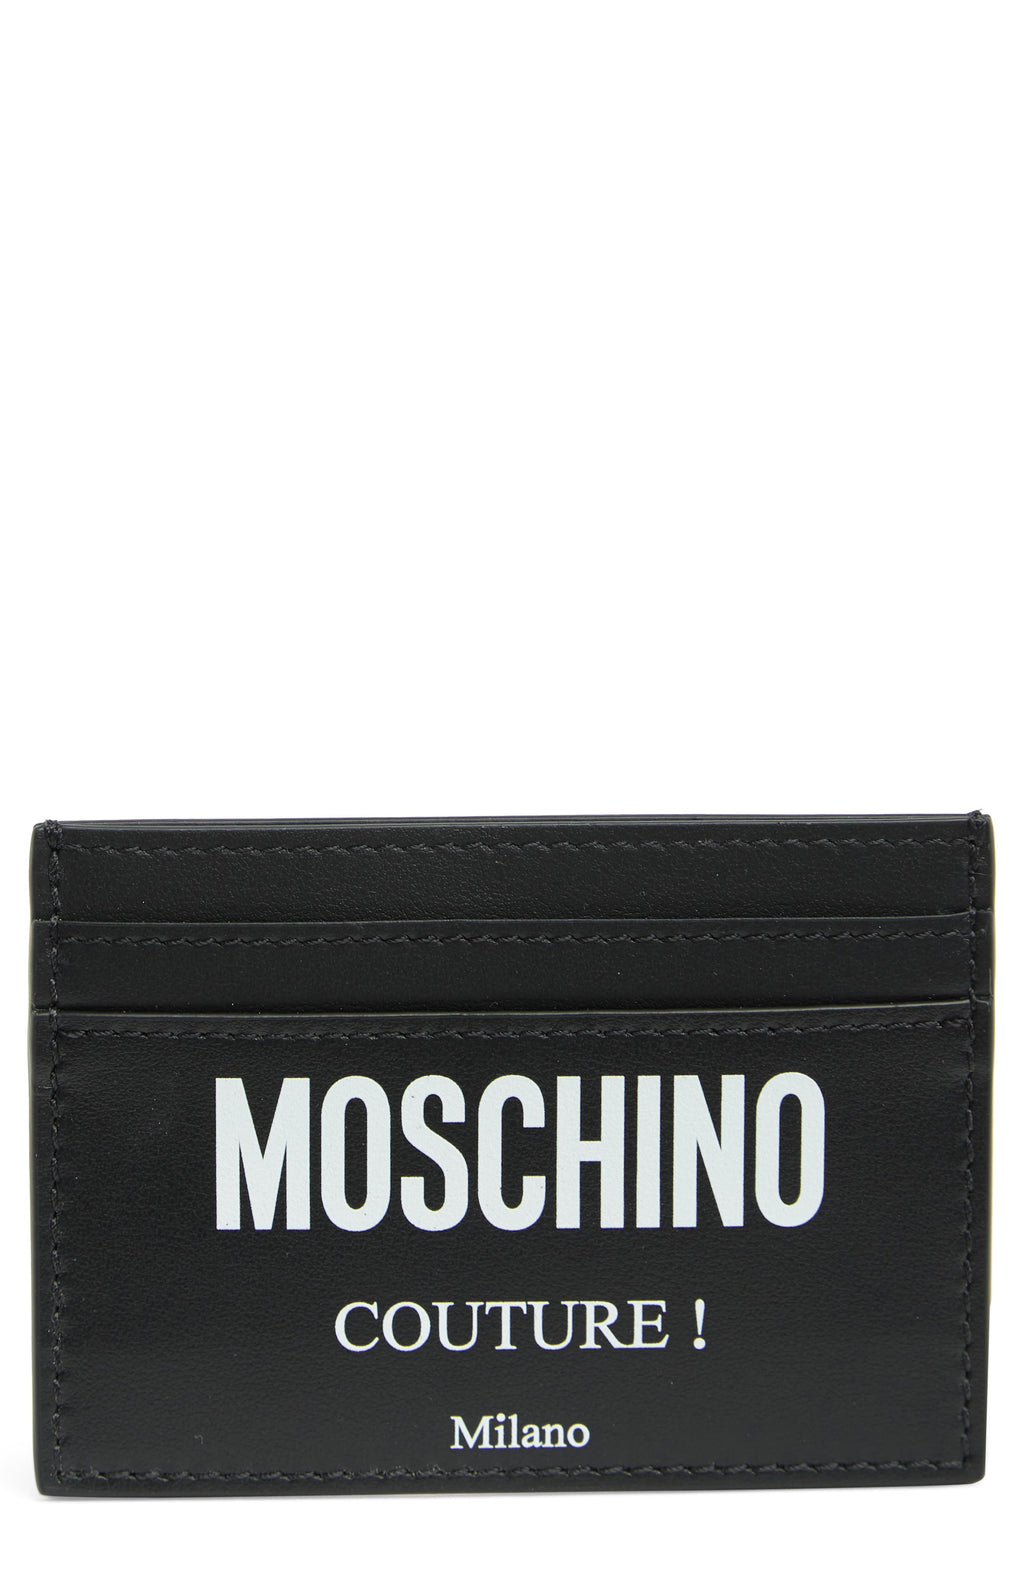 MOSCHINO Leather Card Case, Main, color, BLACK